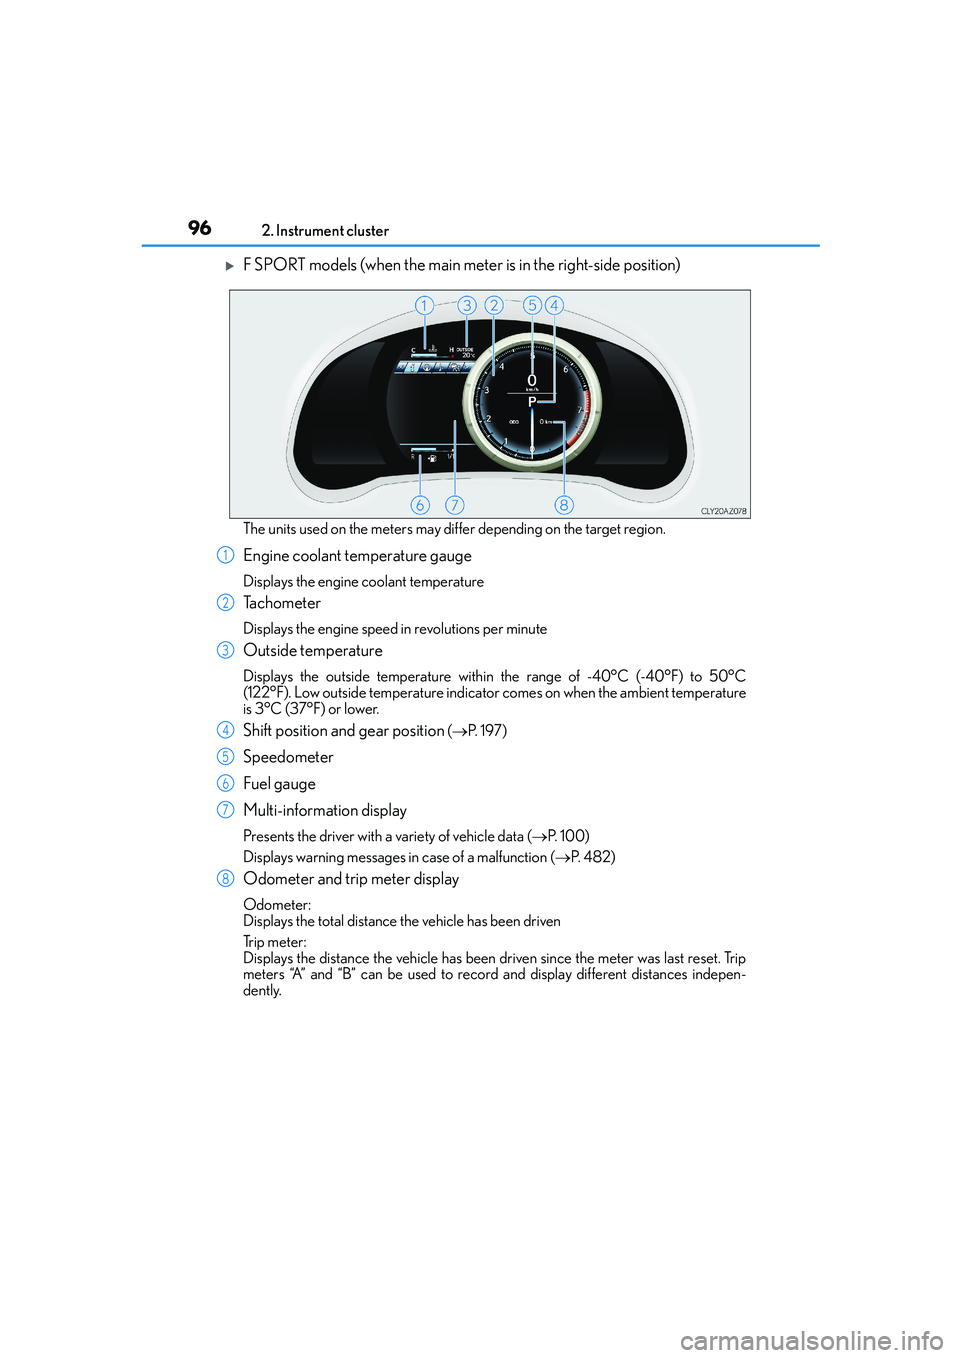 Lexus IS250 2014  Owners Manual 962. Instrument cluster
IS250_EE(OM53C51E)
�XF SPORT models (when the main meter is in the right-side position)
The units used on the meters may differ depending on the target region.
Engine coolant t